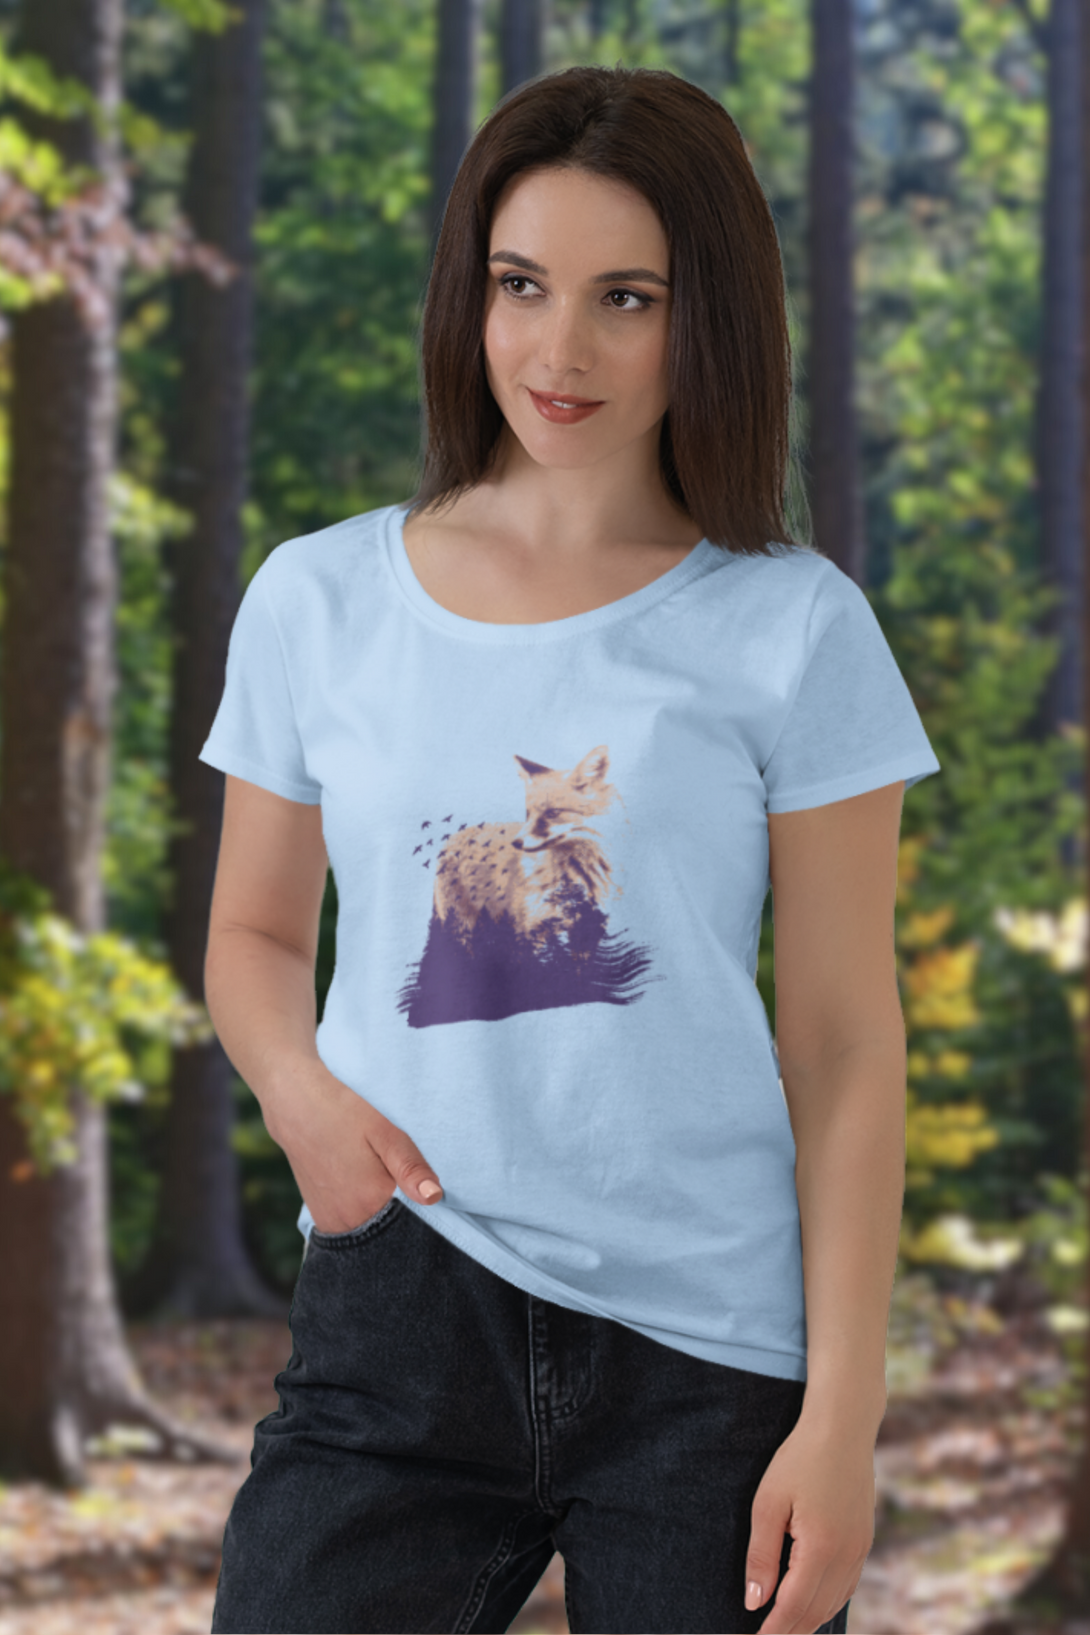 Forest Fox Printed Scoop Neck T-Shirt For Women - WowWaves - 5